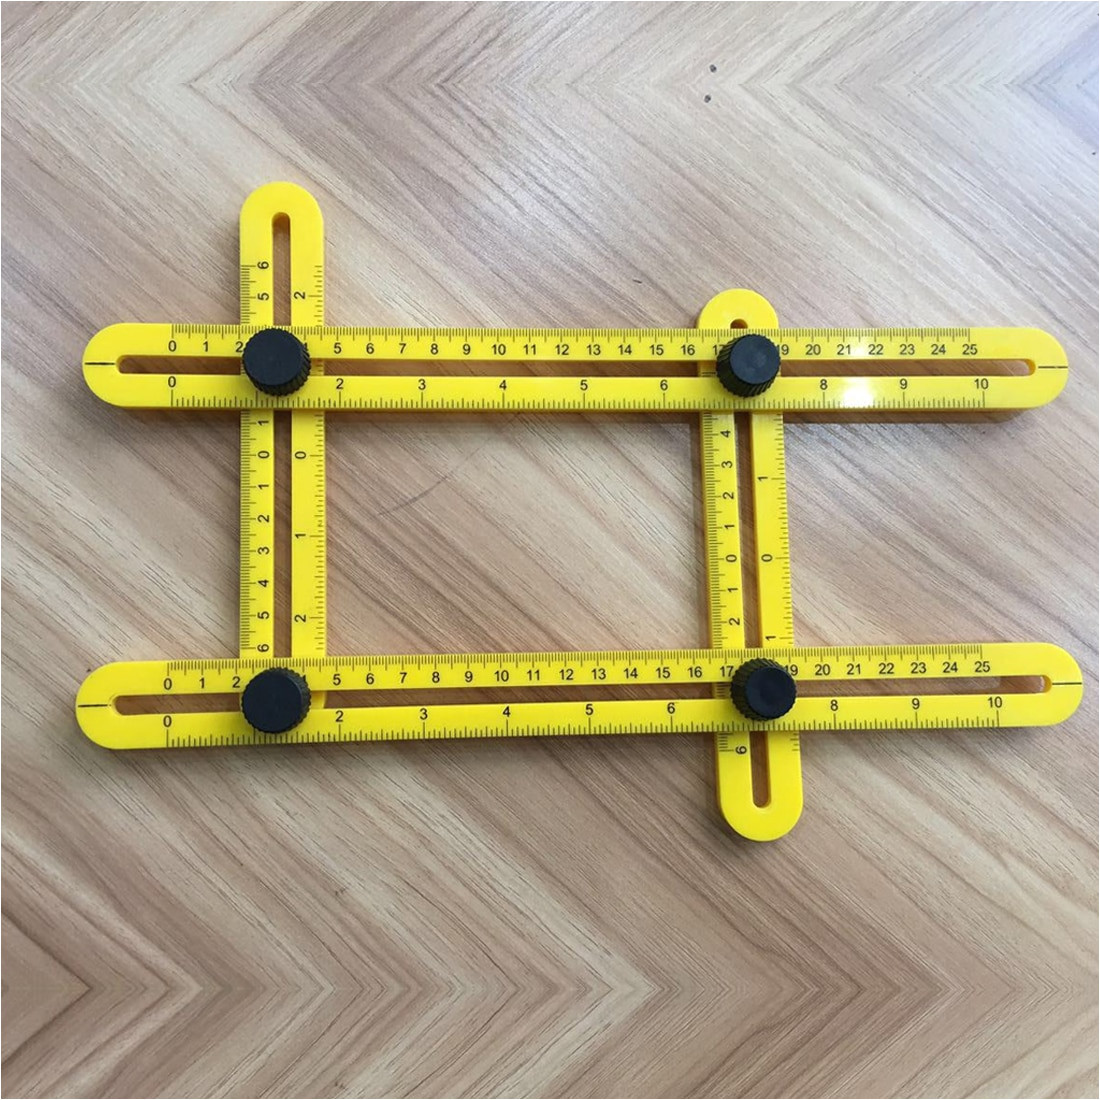 yellow measuring instrument angle square template tool four sided ruler mechanism slide in calipers from tools on aliexpress com alibaba group